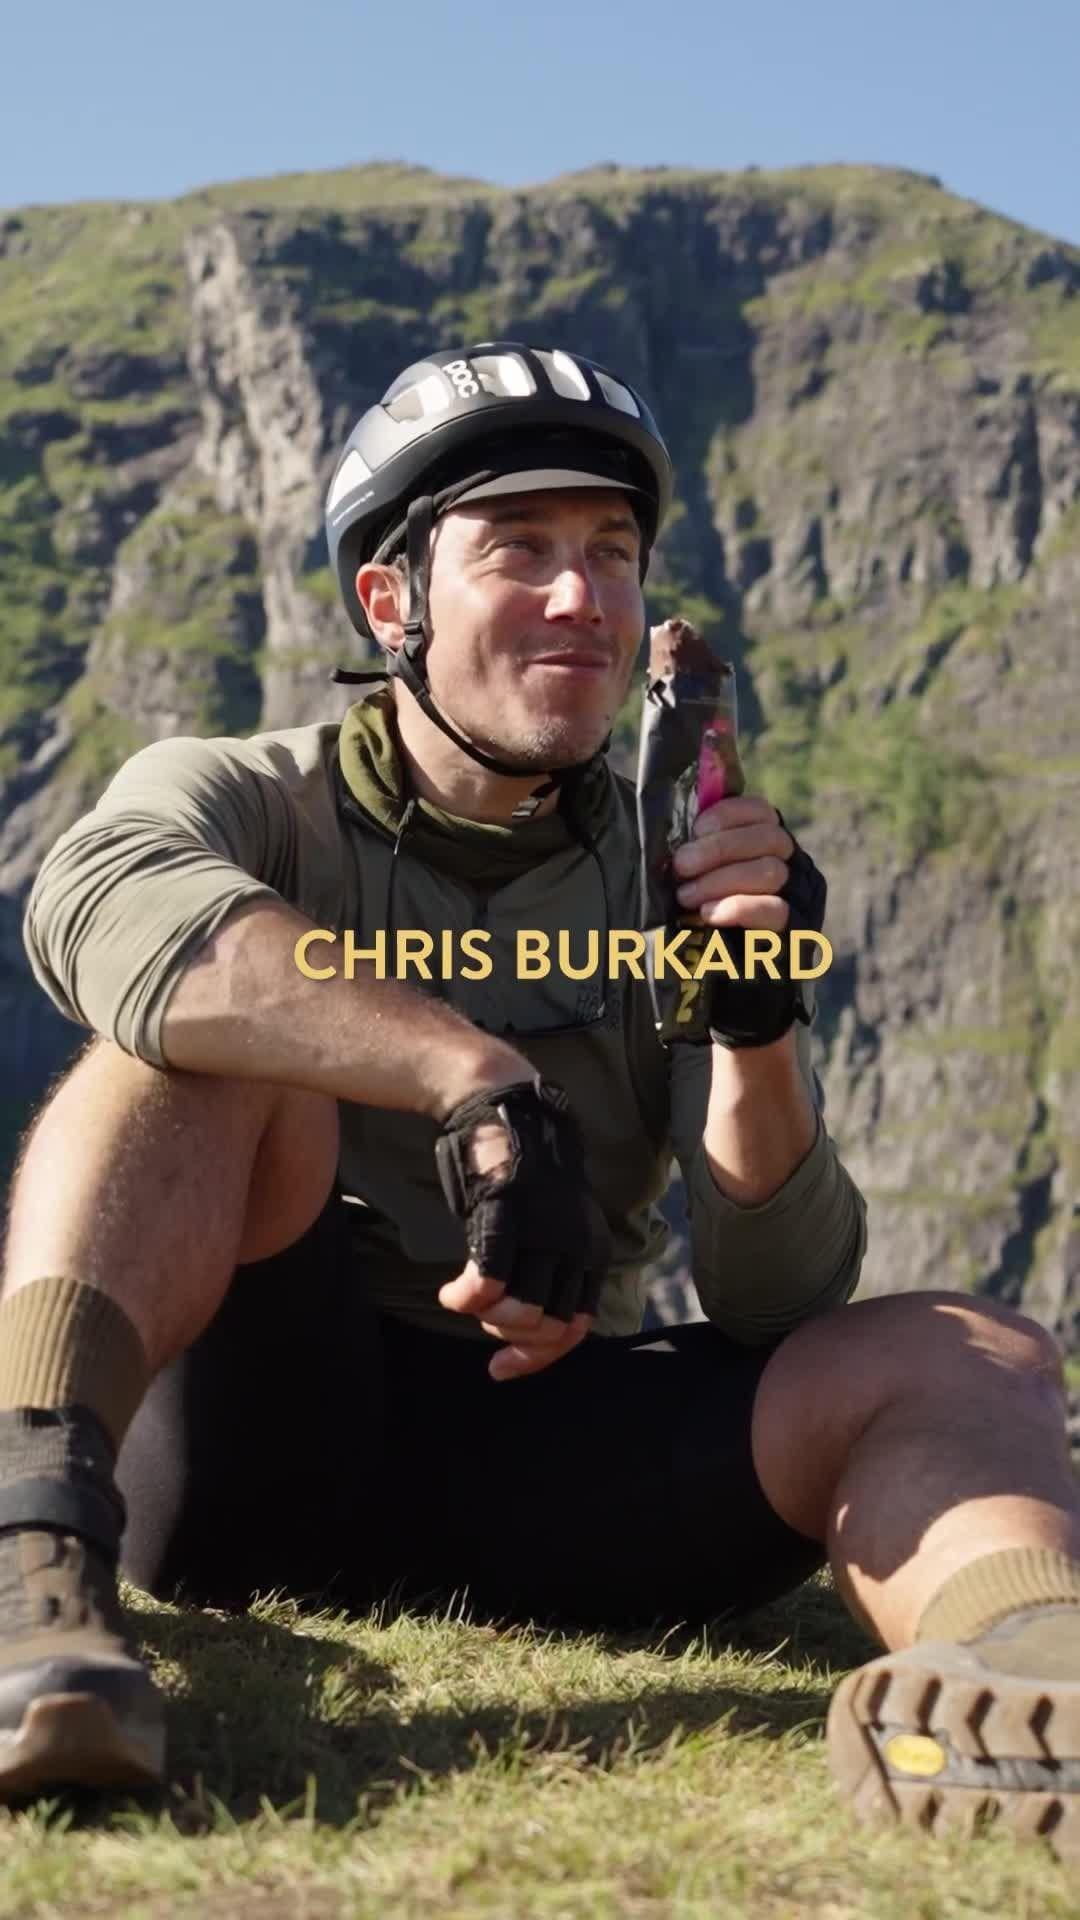 class="content__text"
 We sent @Chrisburkard and his good friend @navajomylo off on the ultimate assignment, to cycle around The Lofoten Archipelago on the hunt for the elusive Nordic Berries that we use in our Dark Chocolate &amp; Nordic Berry ice creams 🫐🍦🚴 

But how did they get on? Watch to find out… 
 